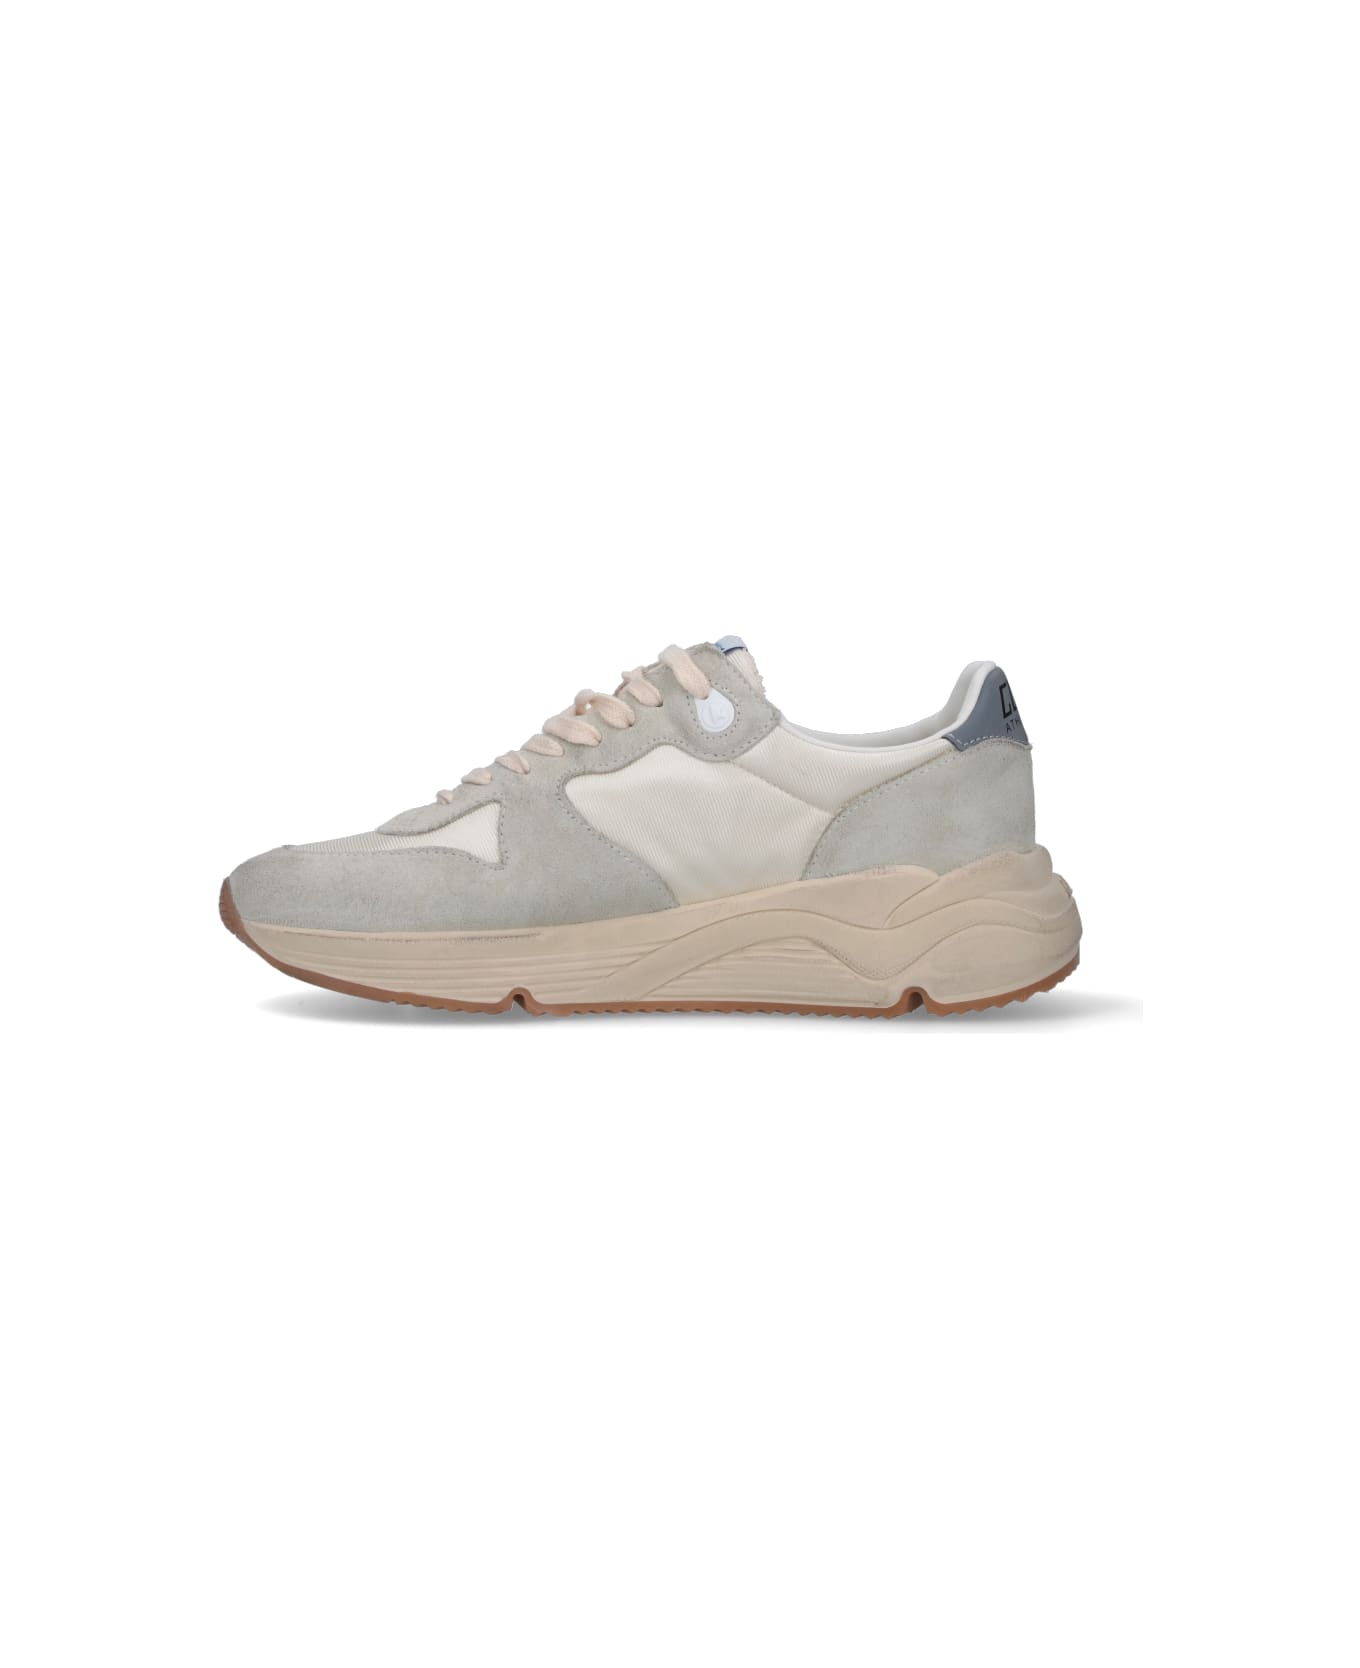 Golden Goose Running Sole Lace-up Sneakers - Cream スニーカー